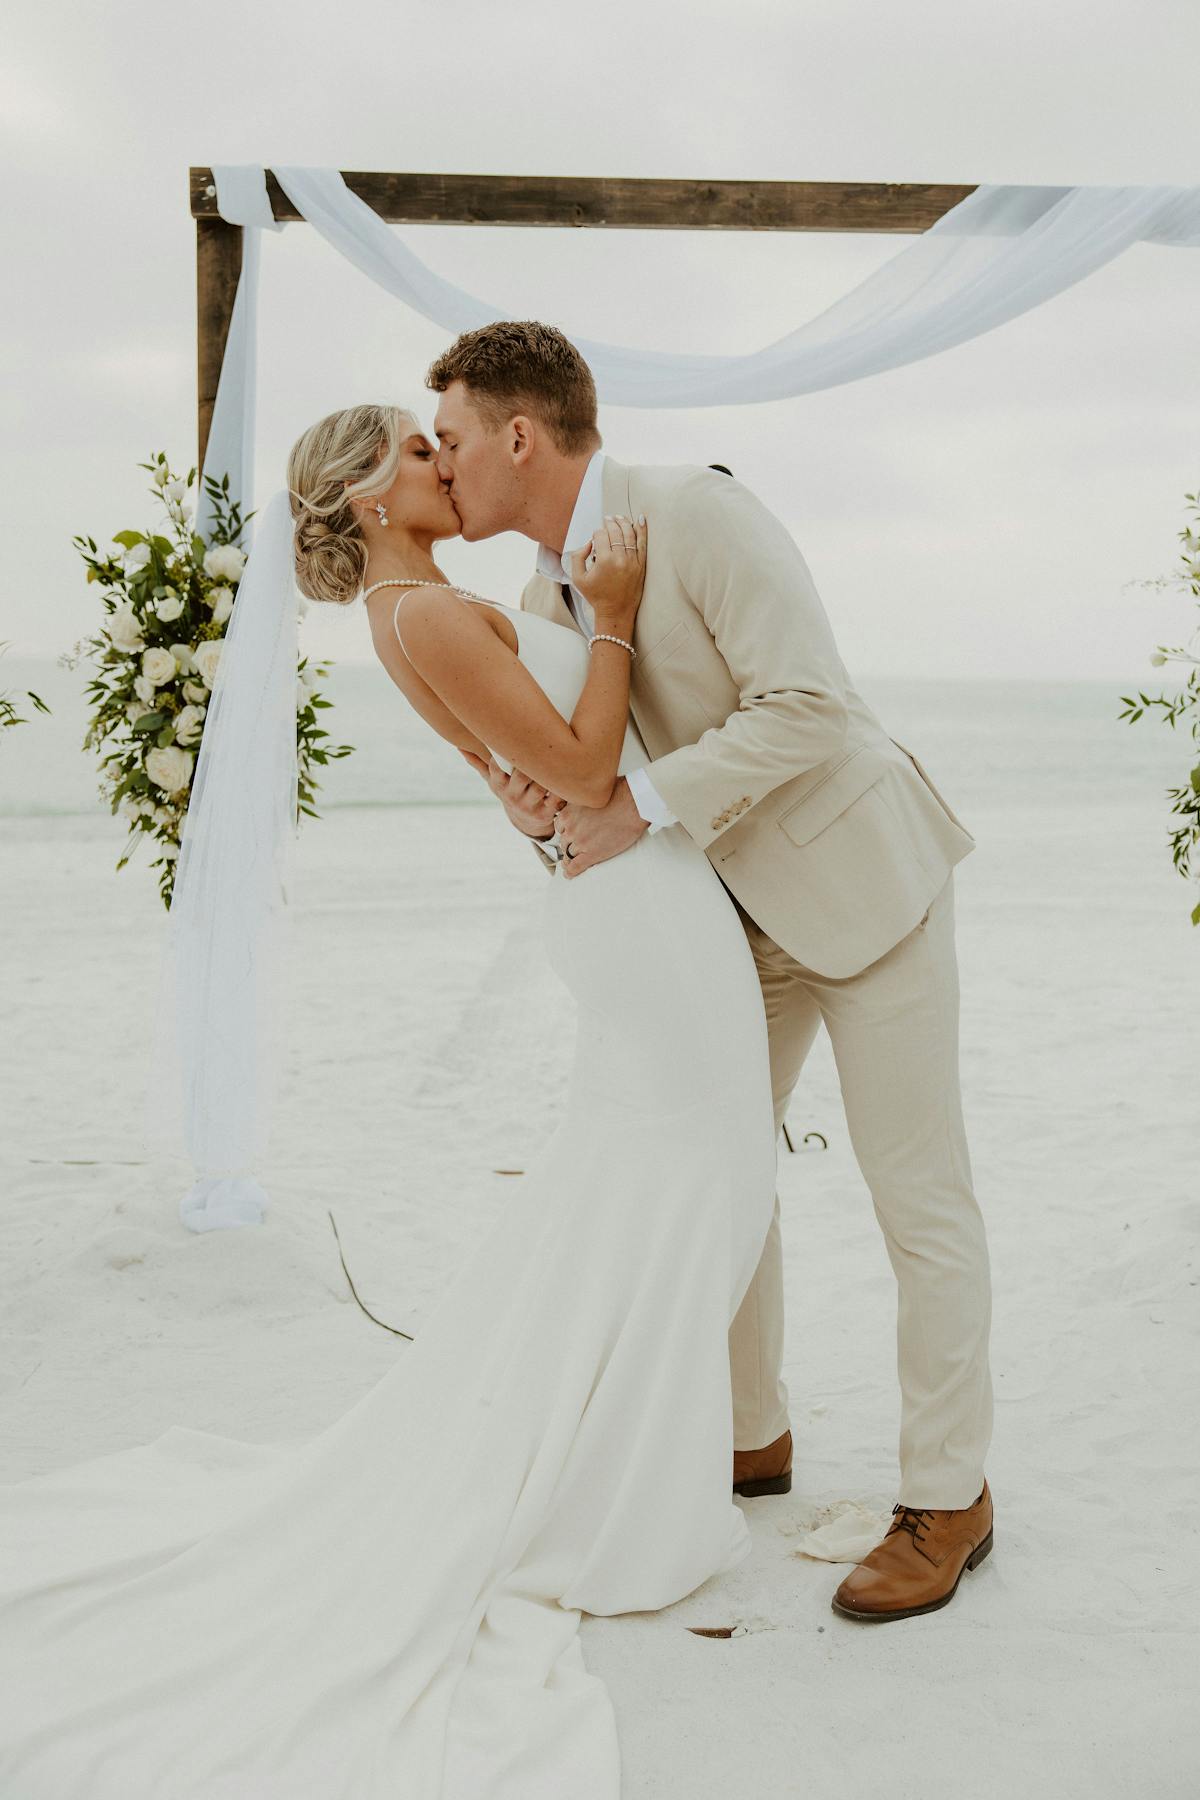 Bride in simple white dress and groom in tan suit at destination beach wedding kissing at the altar.